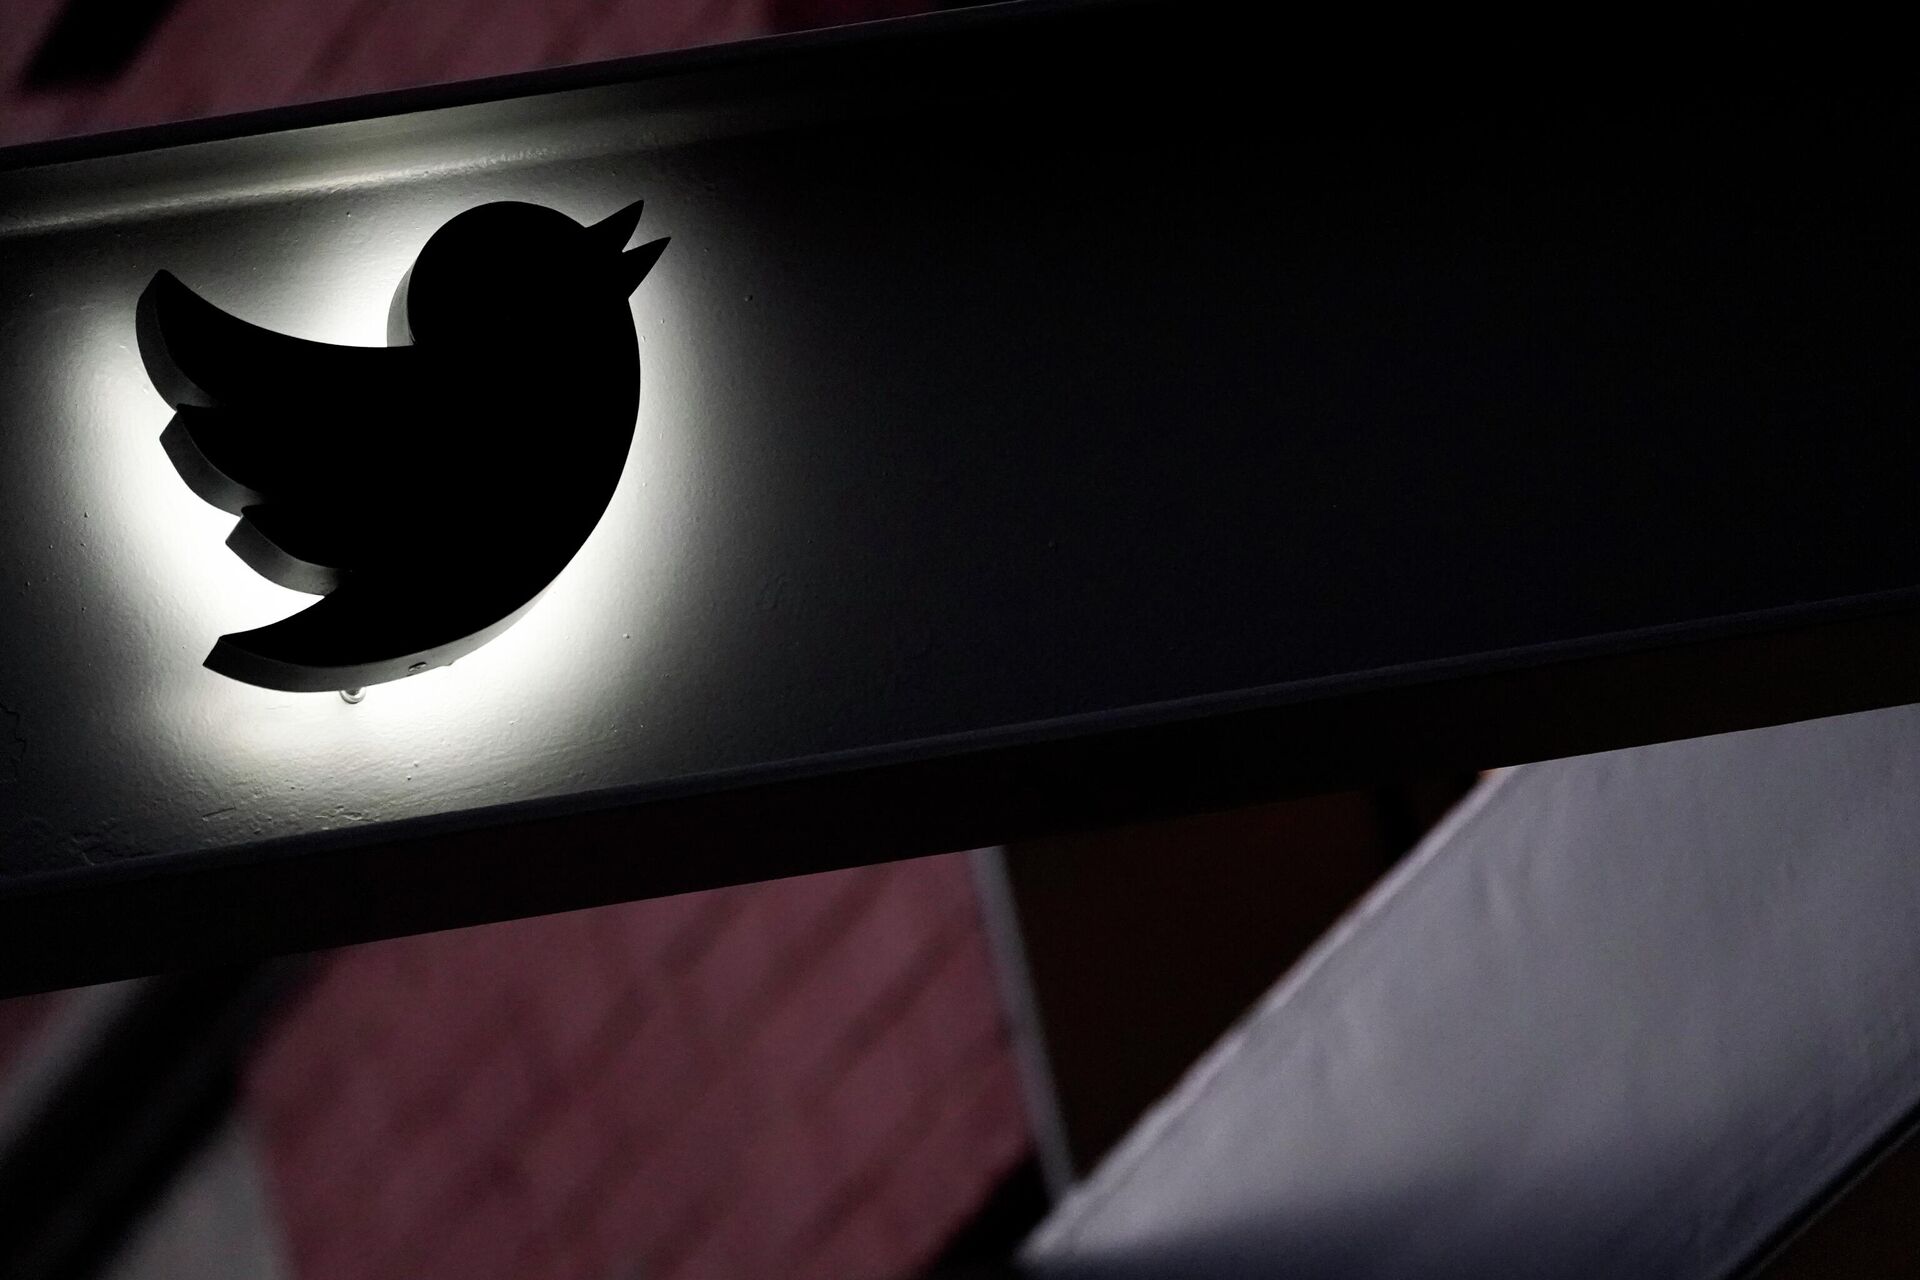 The Twitter logo is seen on the awning of the building that houses the Twitter office in New York, Wednesday, Oct. 26, 2022. Elon Musk posted a video Wednesday showing him strolling into Twitter headquarters ahead of a Friday deadline to close his $44 billion deal to buy the company. - Sputnik International, 1920, 01.12.2022